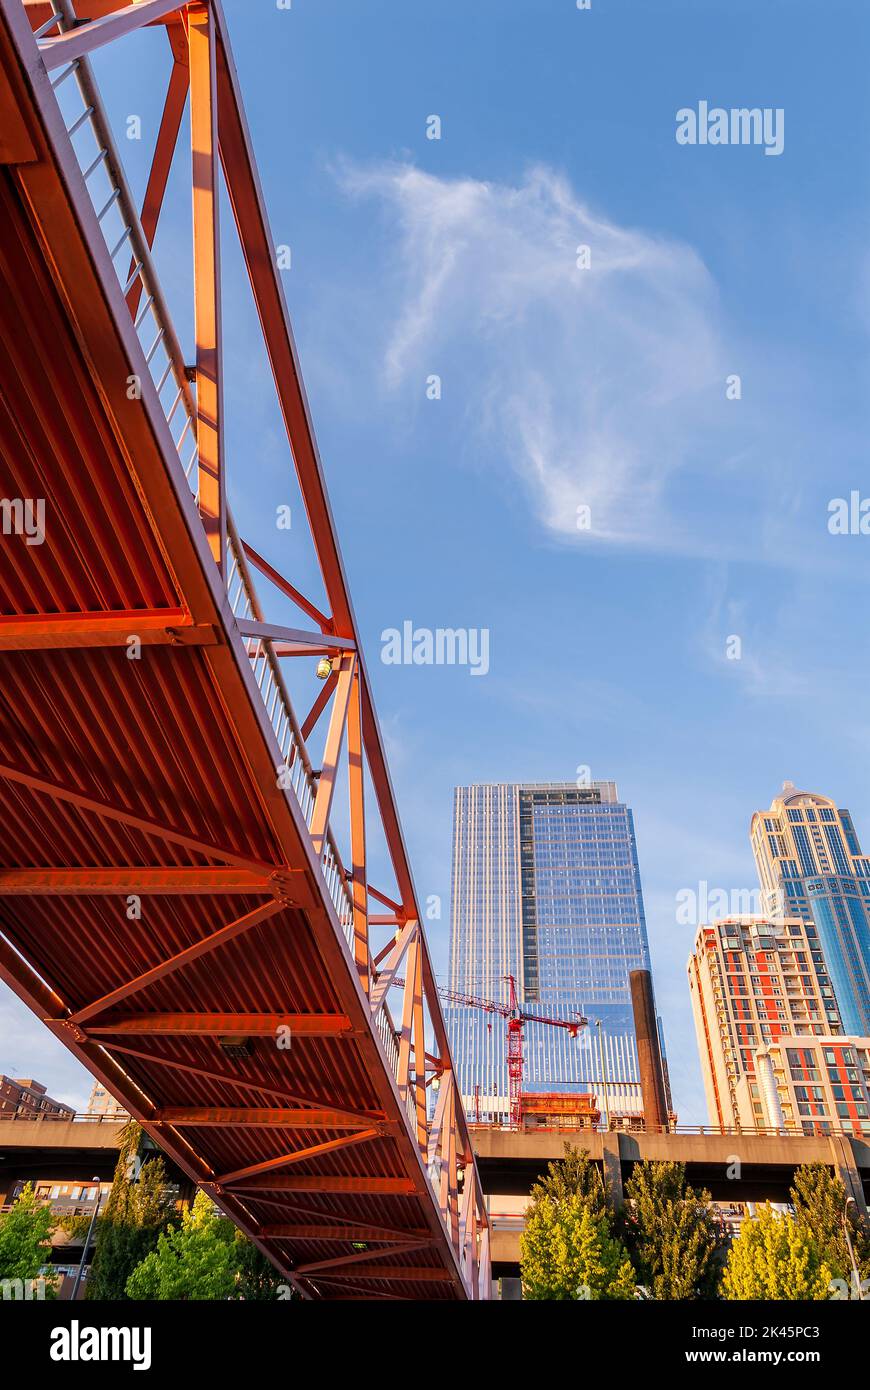 Red bridge seen from below with high rise contruction sites in background. Stock Photo